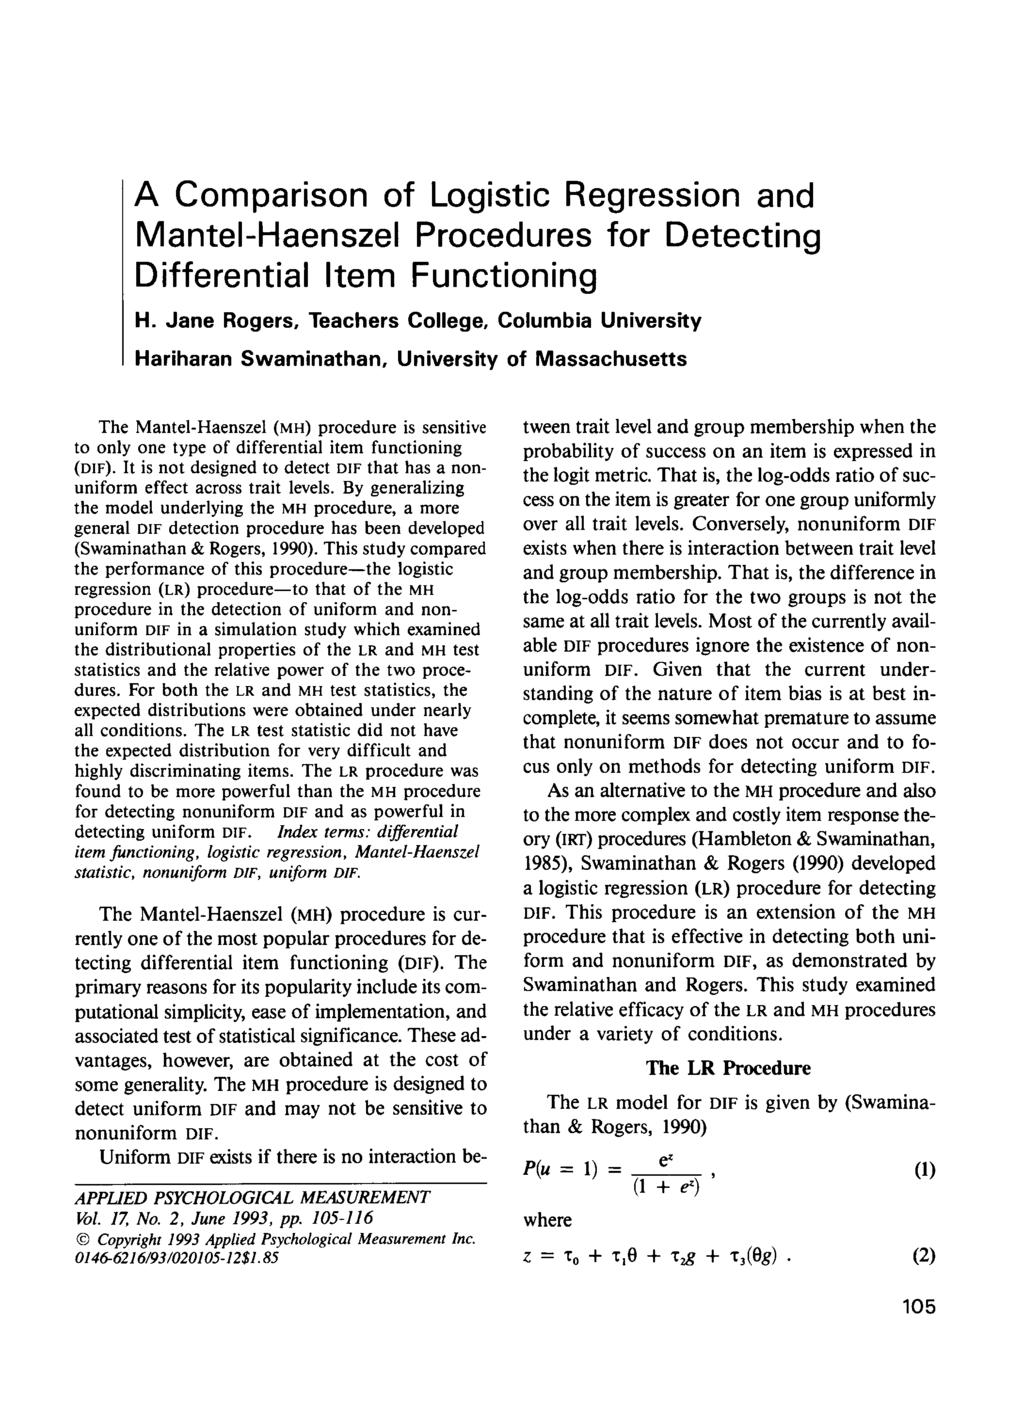 A Comparison of Logistic Regression and Mantel-Haenszel Procedures for Detecting Differential Item Functioning H.